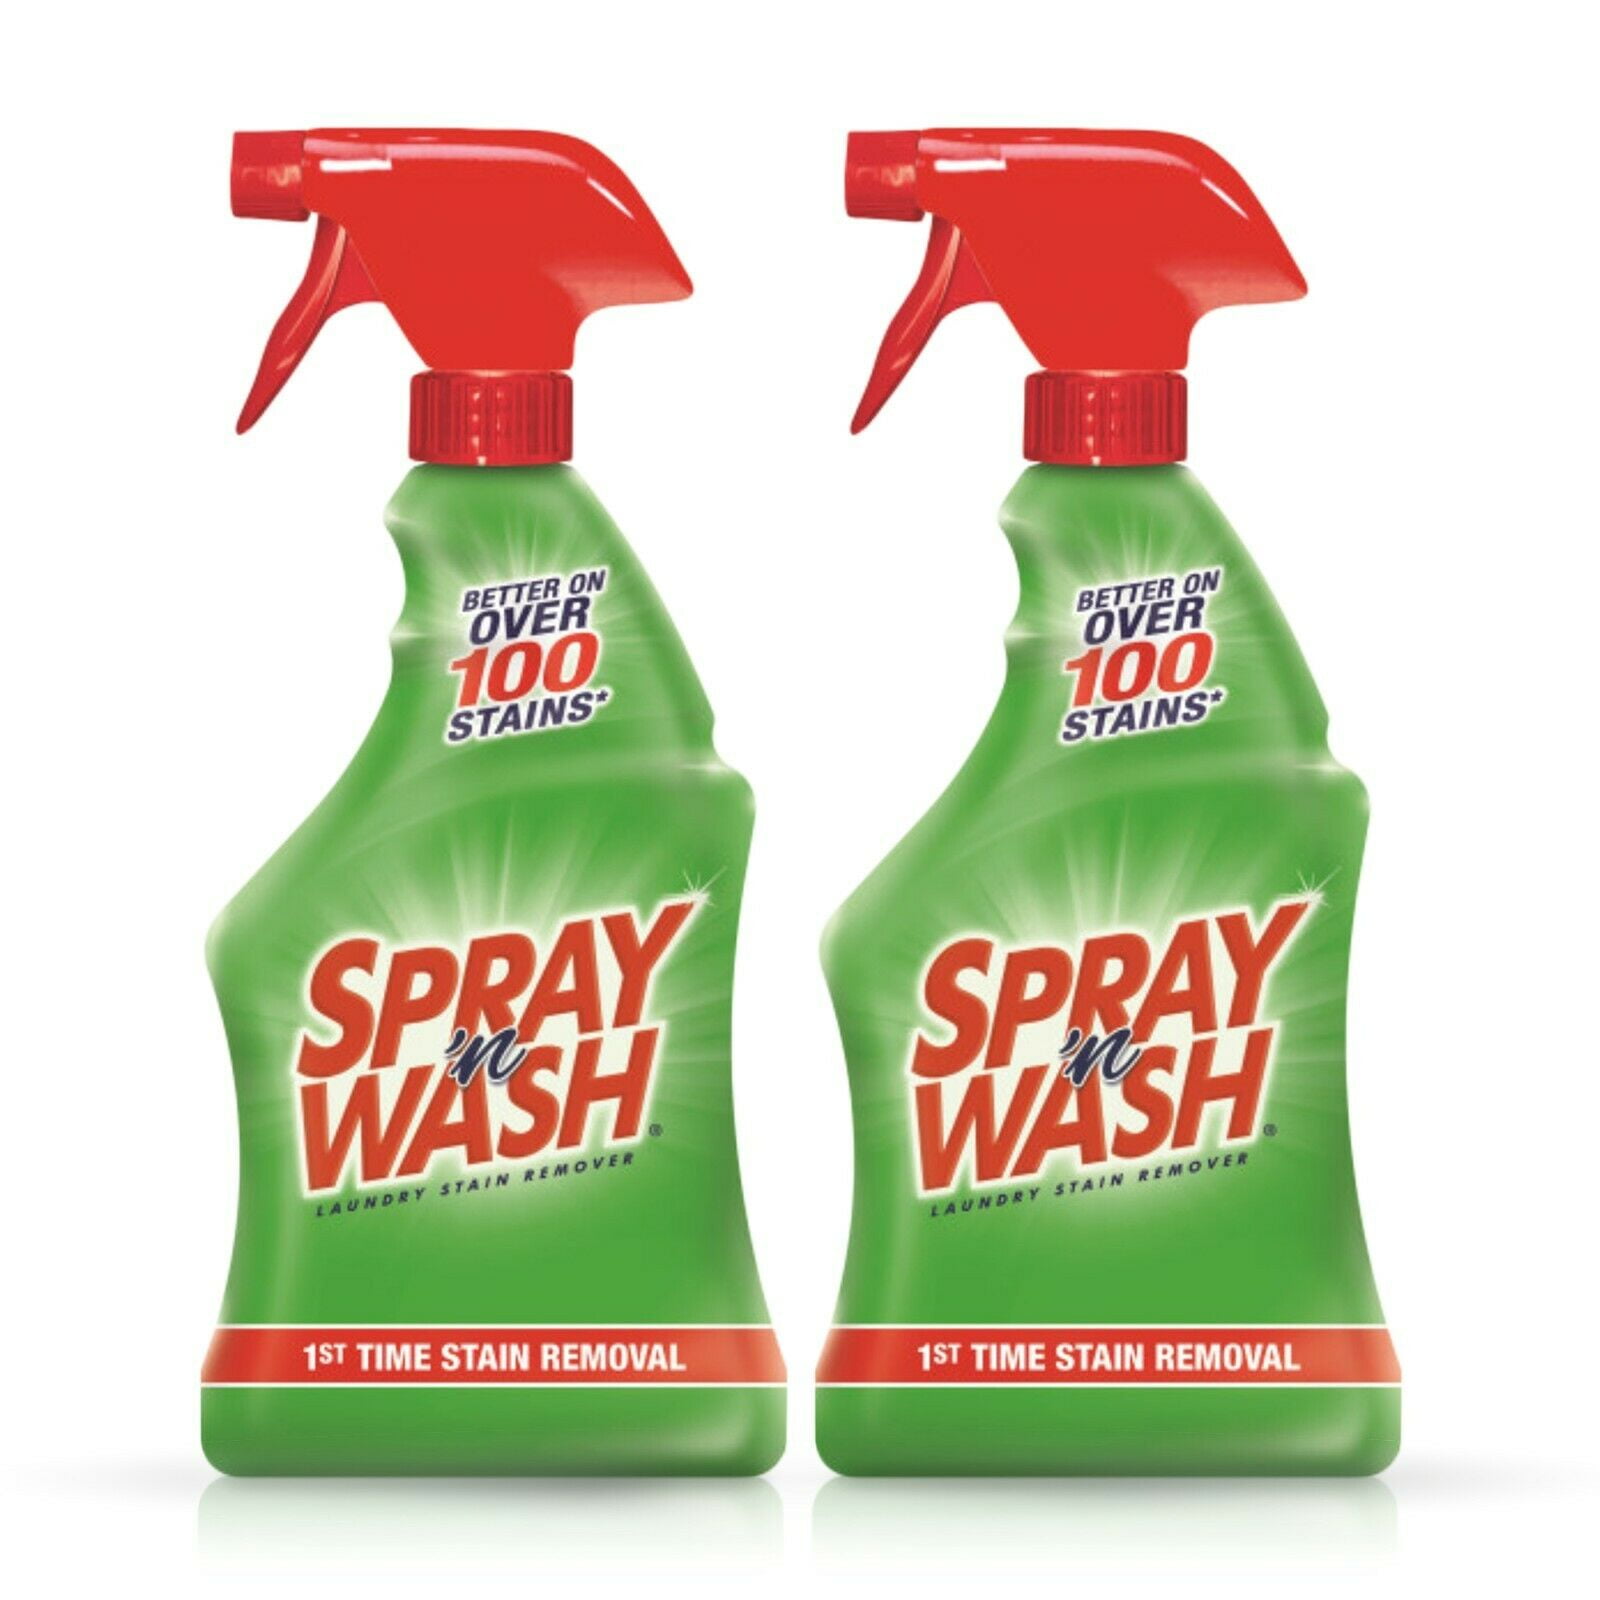 Spray 'n Wash Pre-Treat Laundry Stain Remover, 22 fl oz Bottle (Pack of 2)